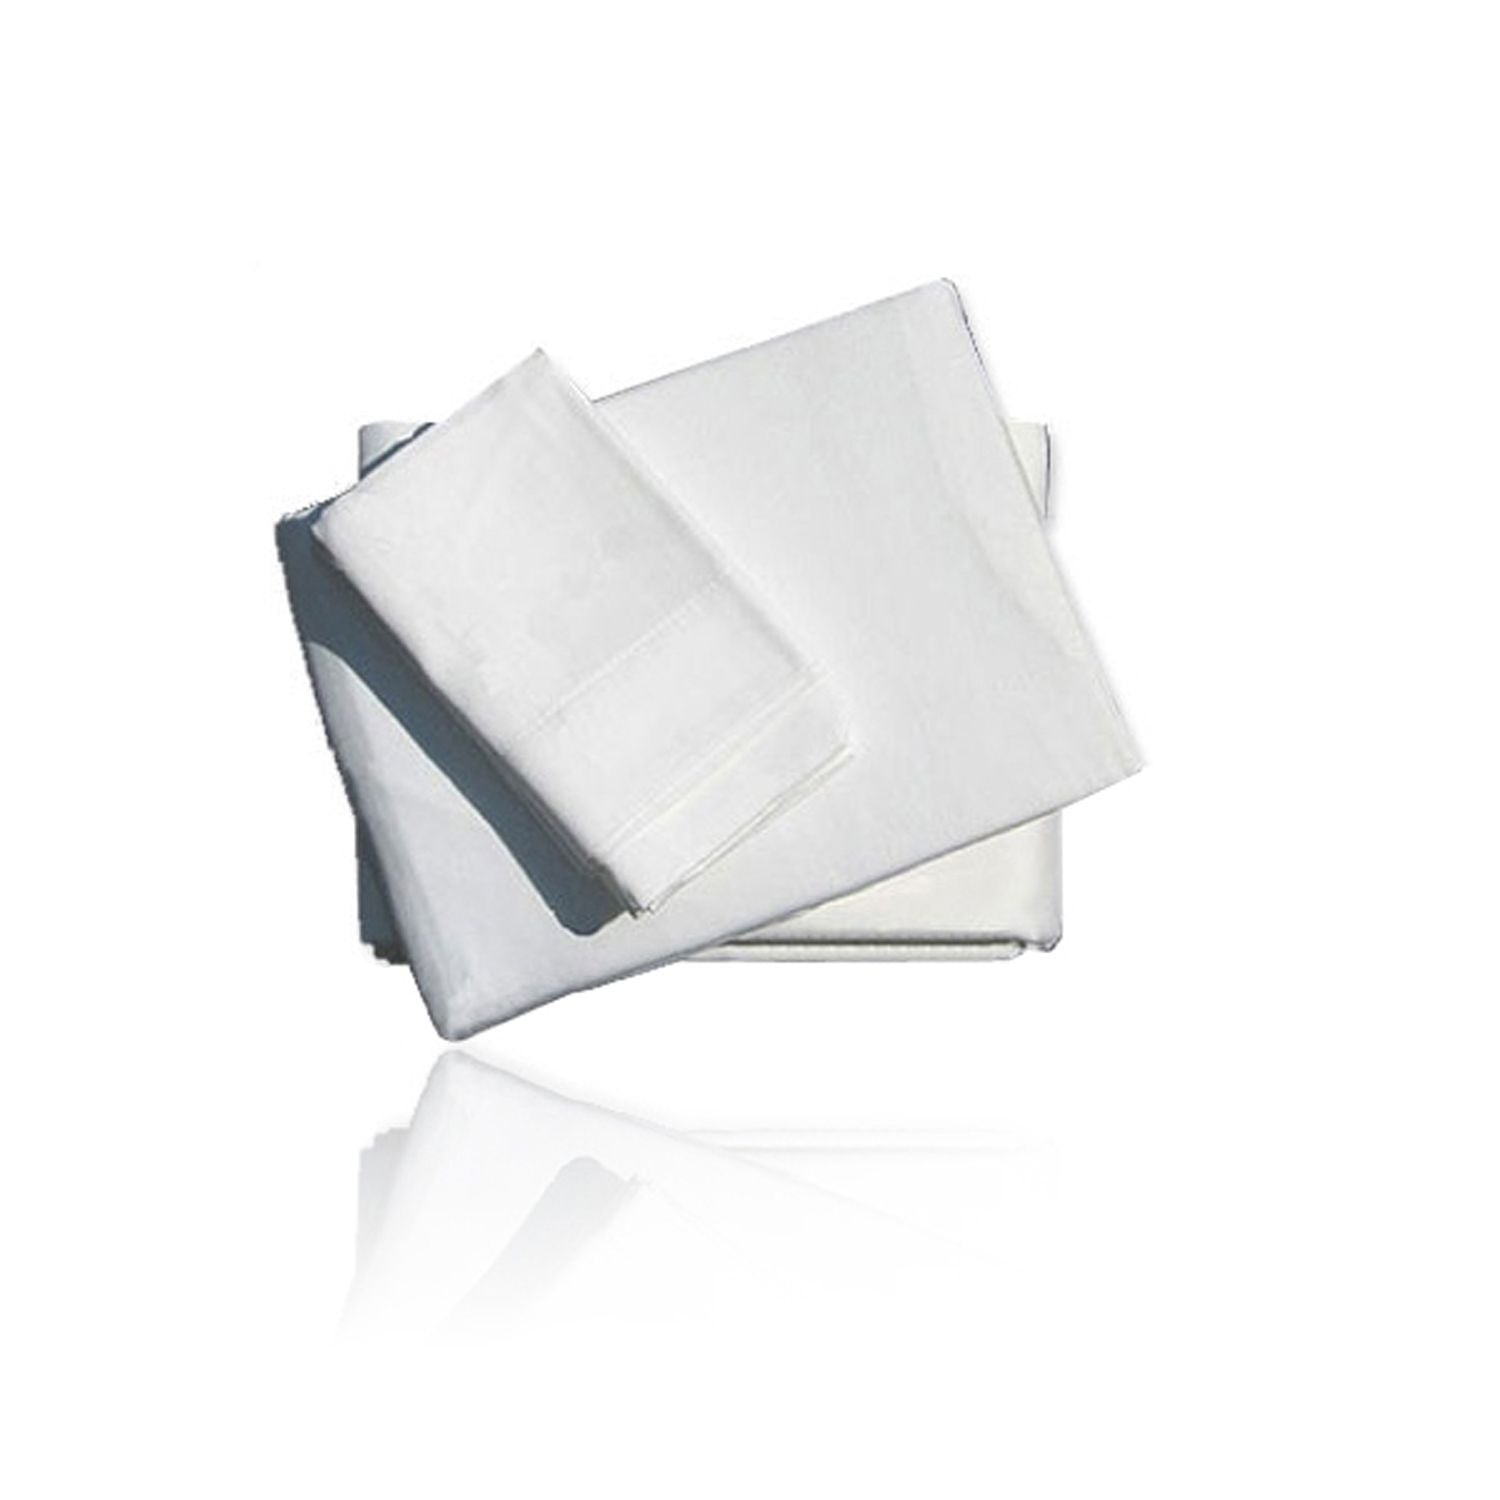 White Disposable Bed Sheet Size : 229 x 140cm (50 Pieces Per Pack)